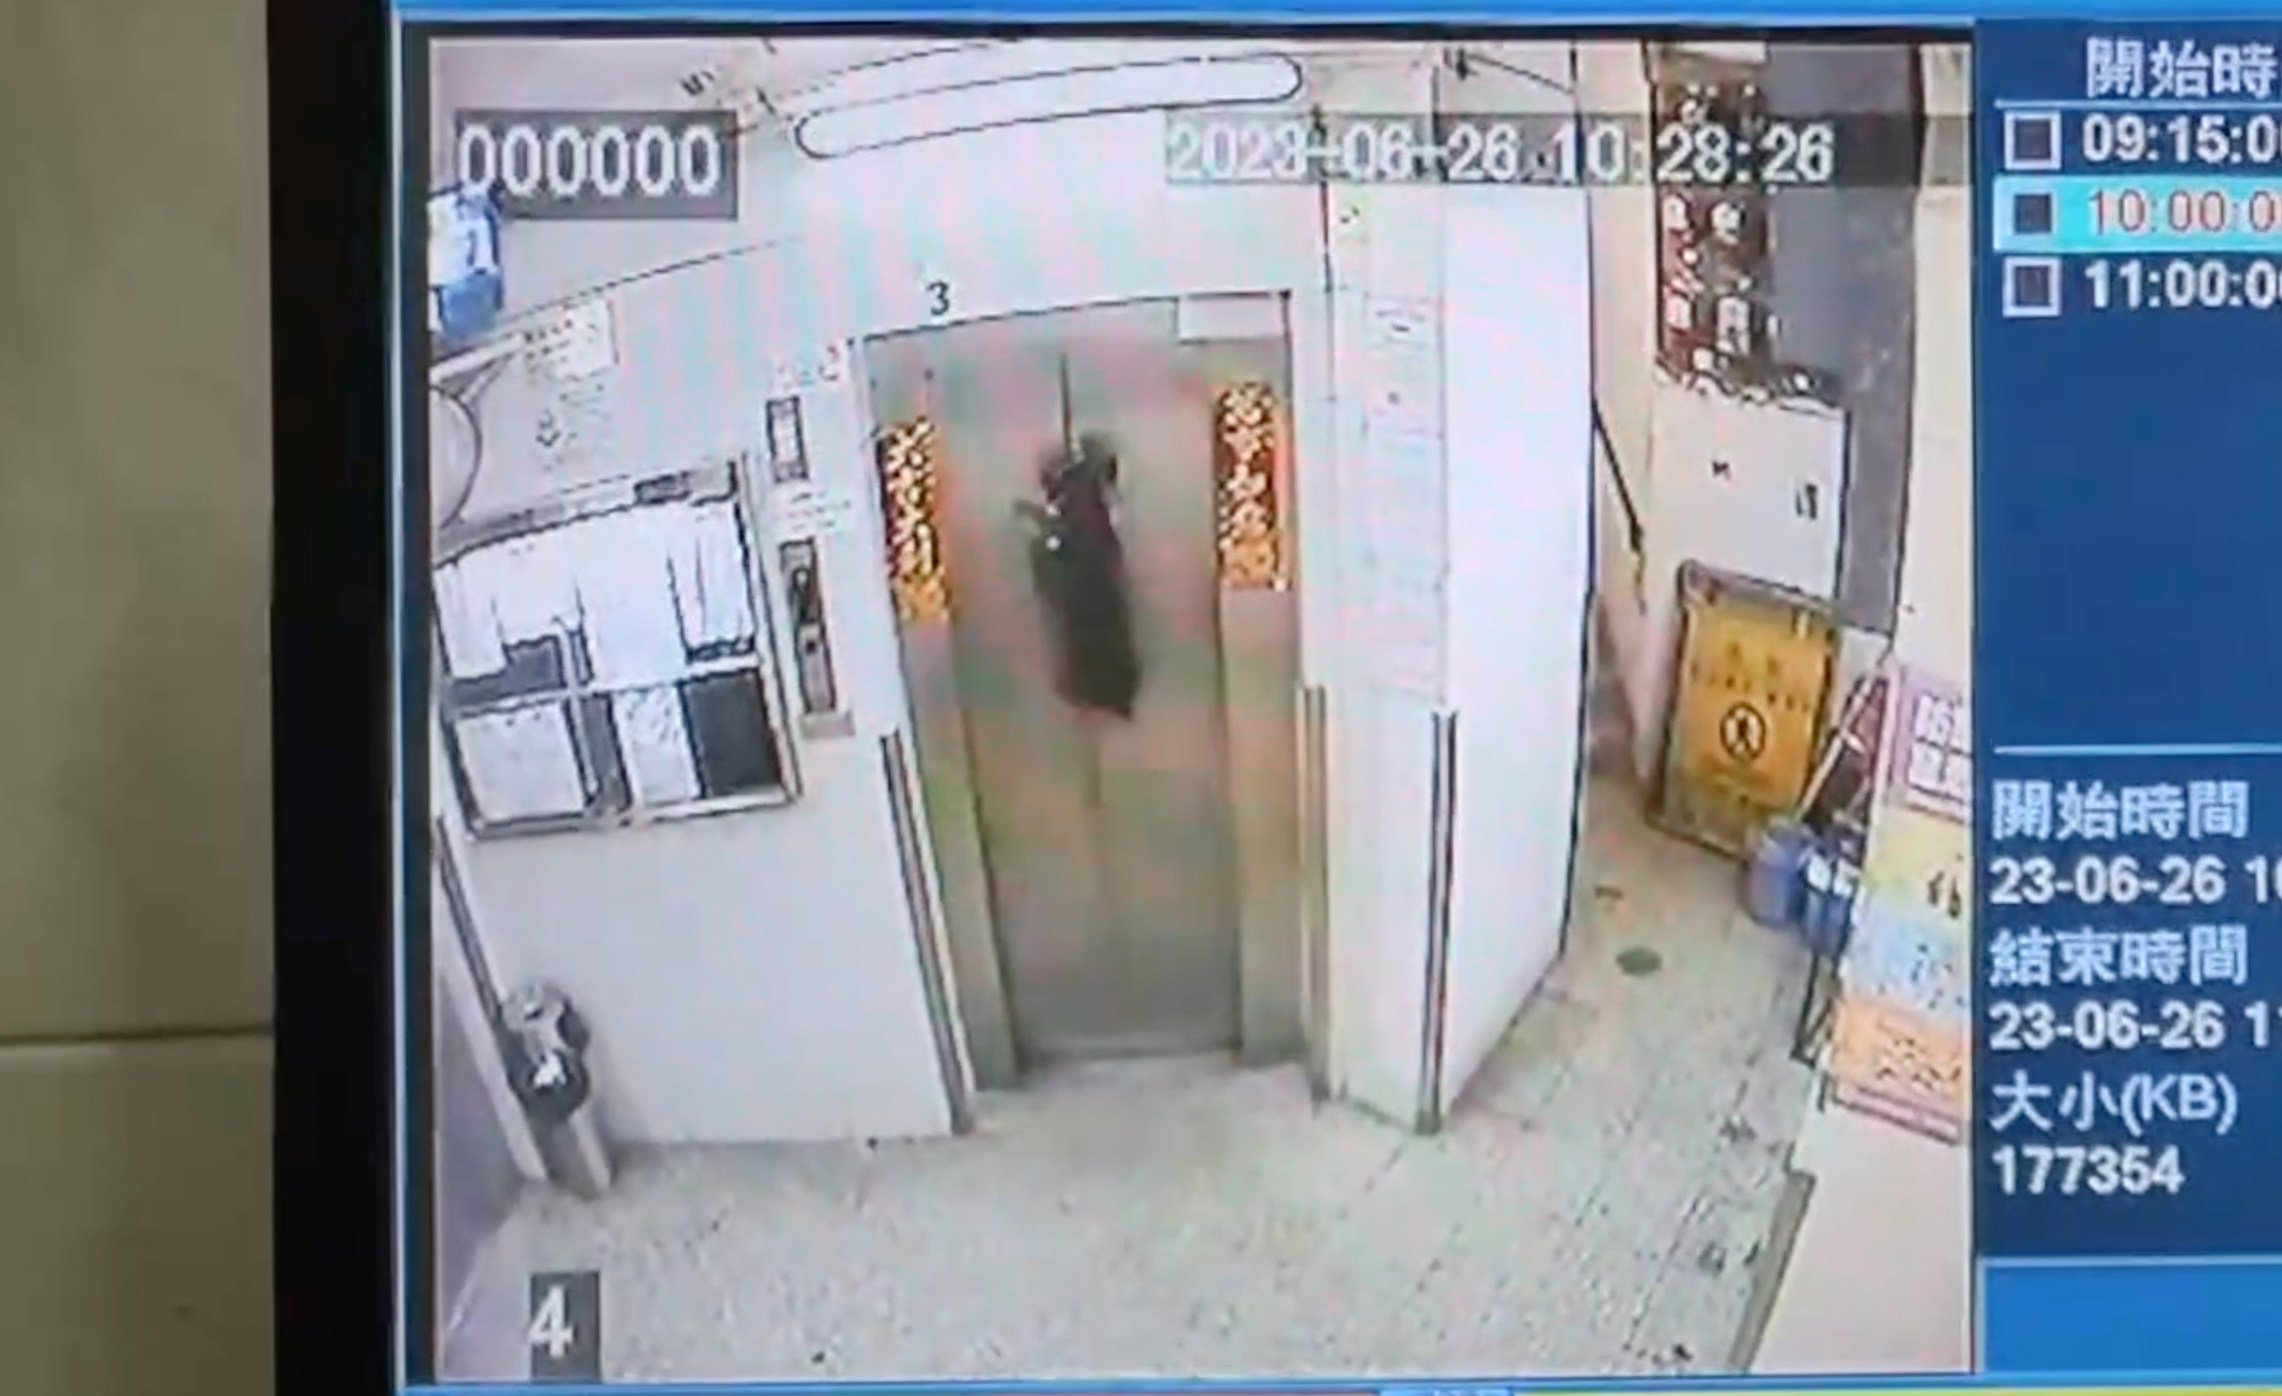 This picture taken from security camera footage shows a dog on a leash being dragged up by a lift before it manages to escape. Photo: Handout